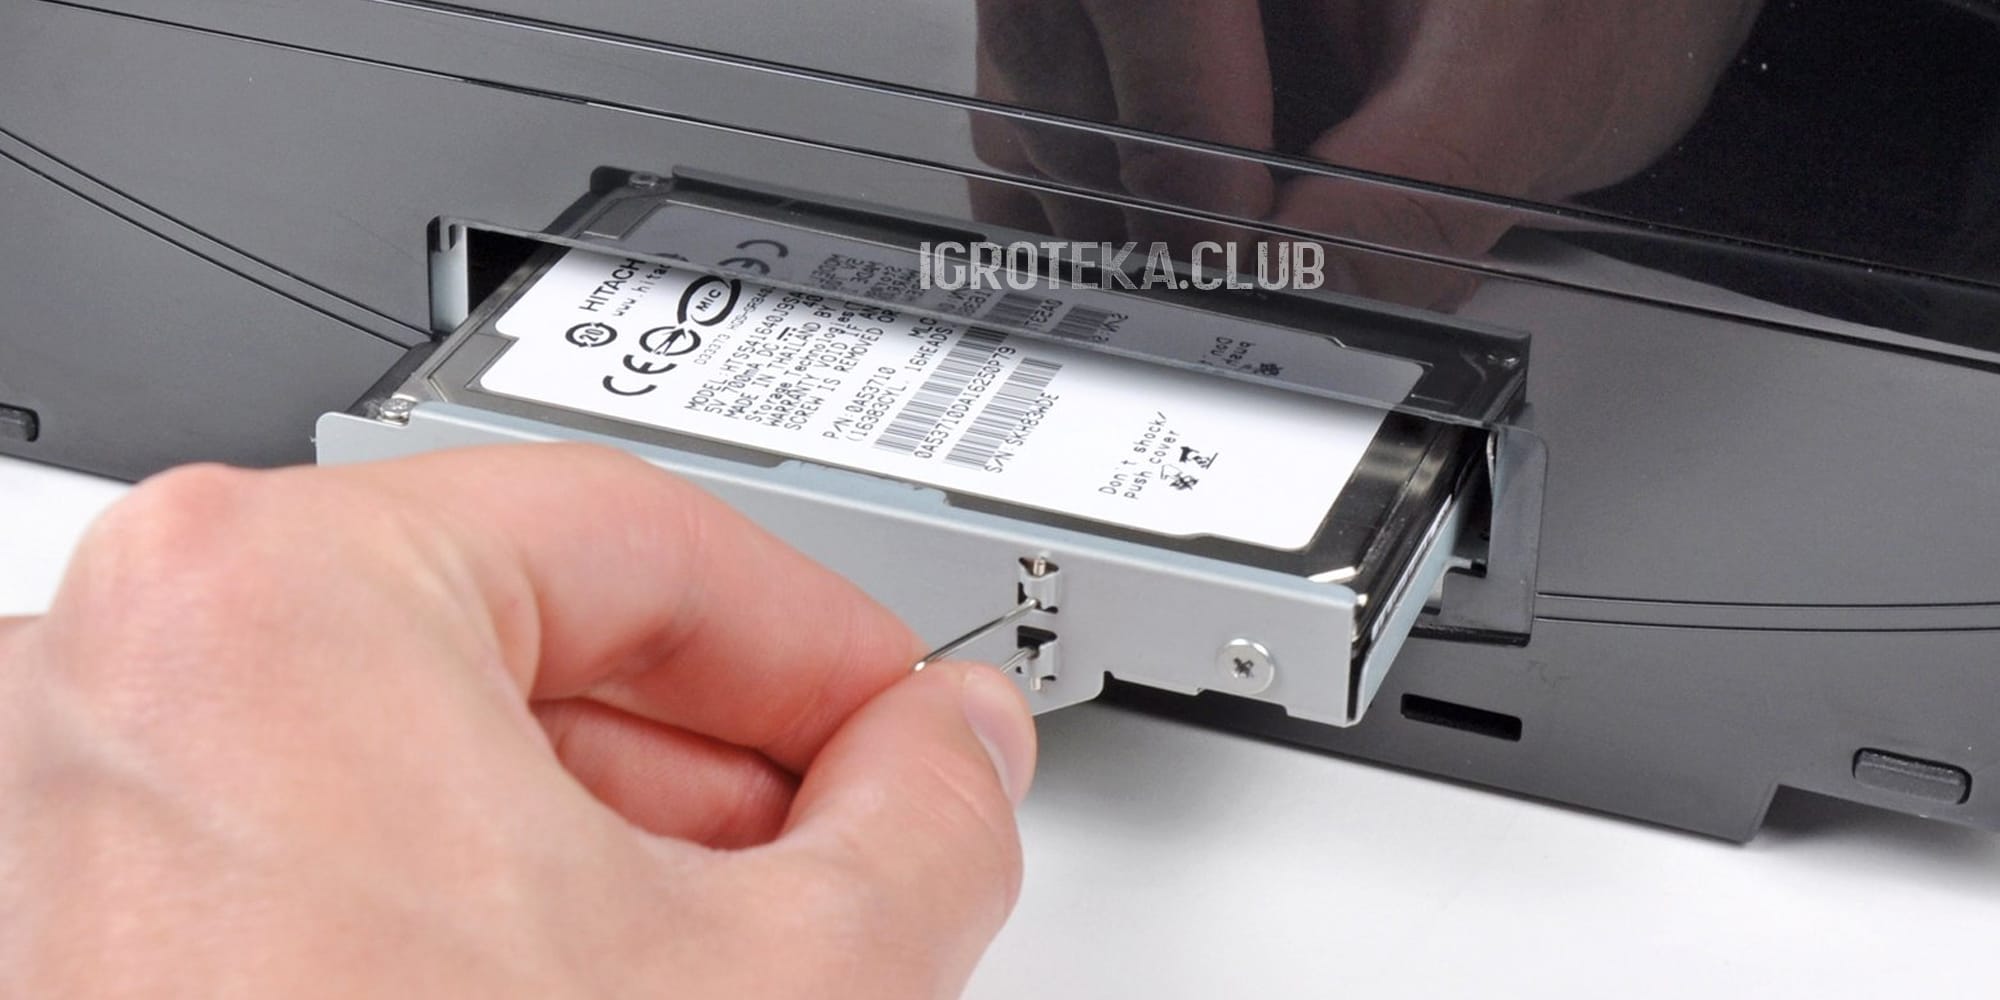 Ps3 поменяю. Пломба на ps3 Slim. Жесткий диск ps3. PLAYSTATION 3 HDD Replacement. Диск SSD для ps3 fat.